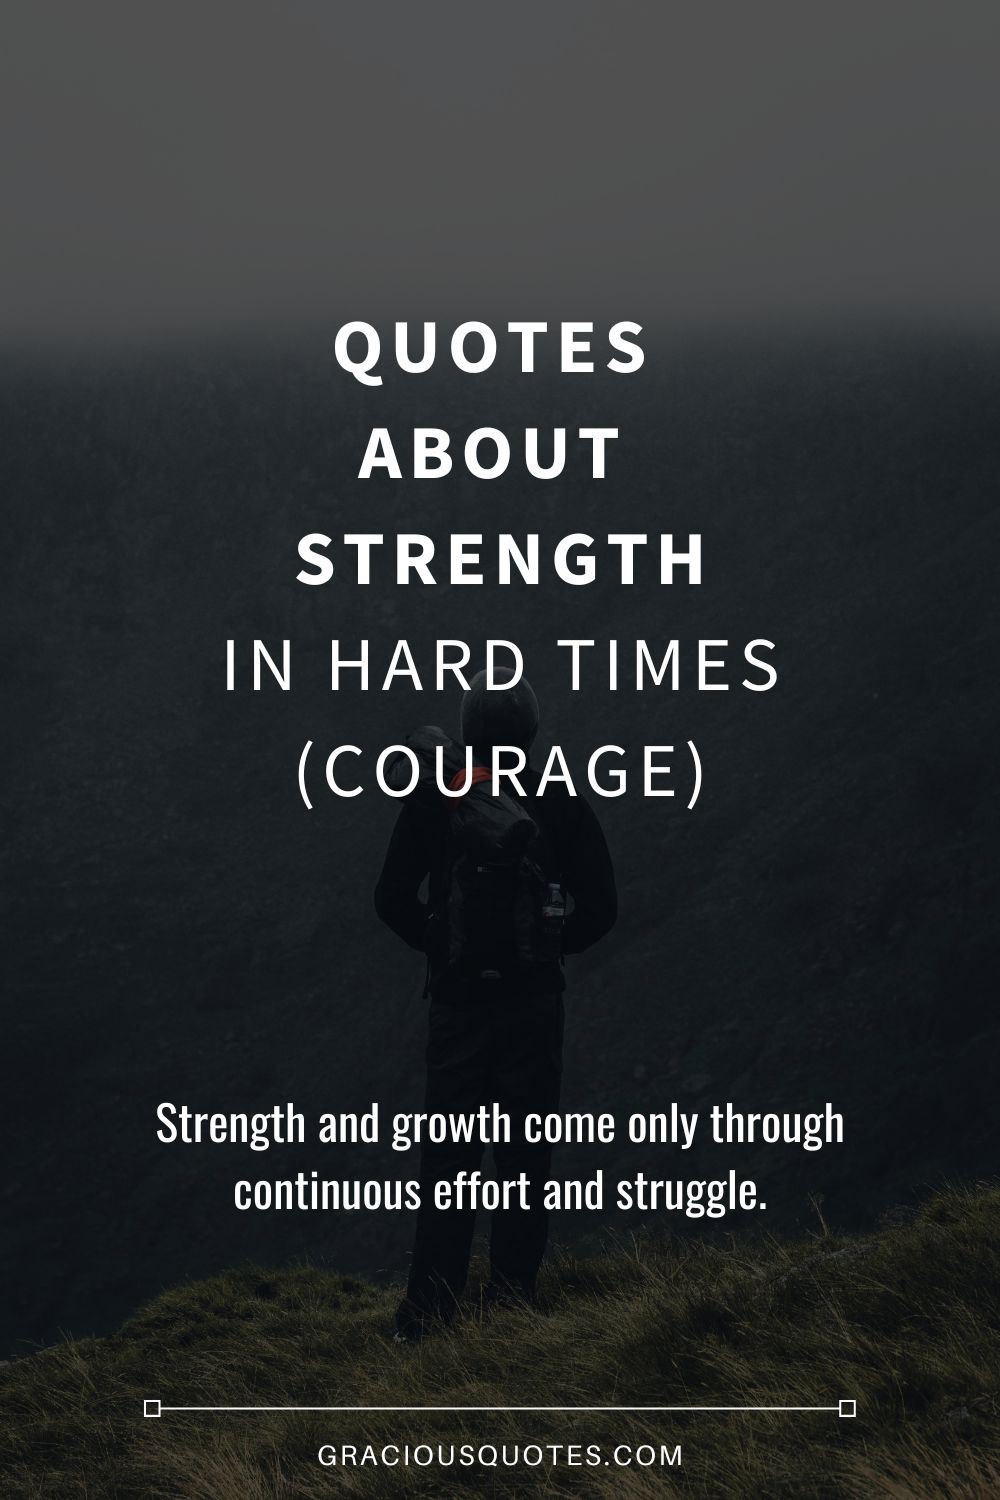 quotes of encouragement and strength